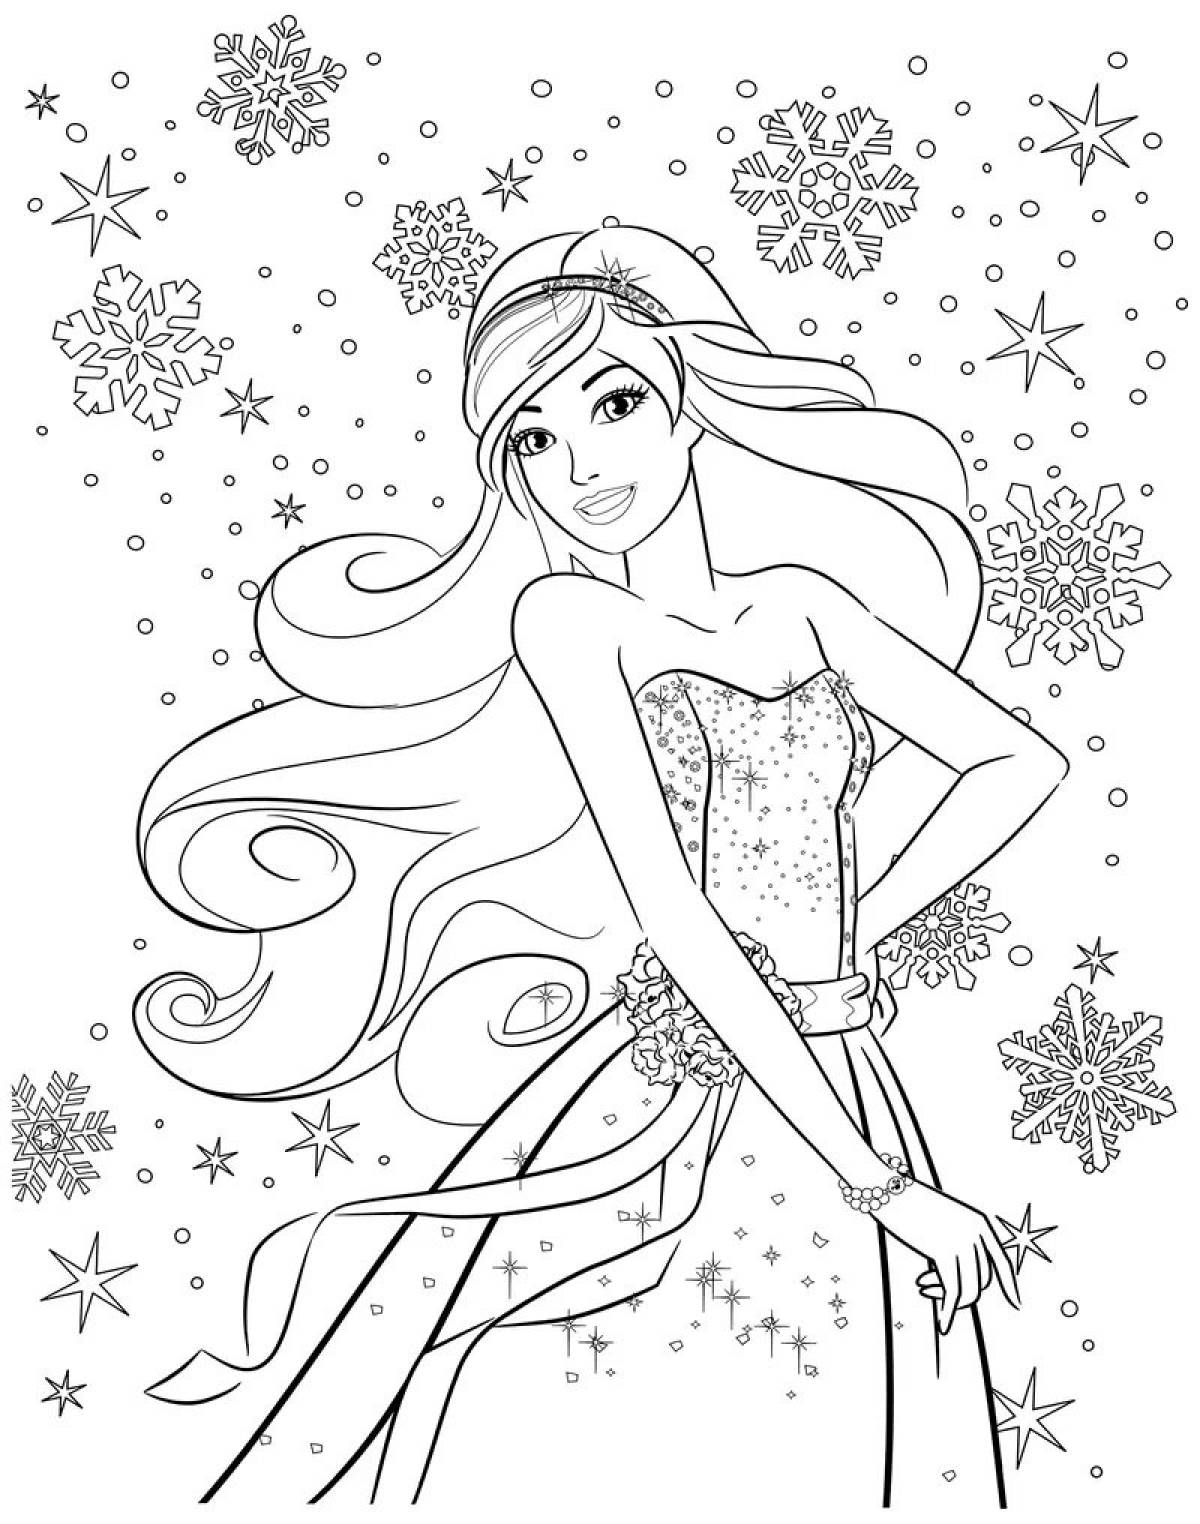 Fascinating Christmas coloring book for girls 10 years old